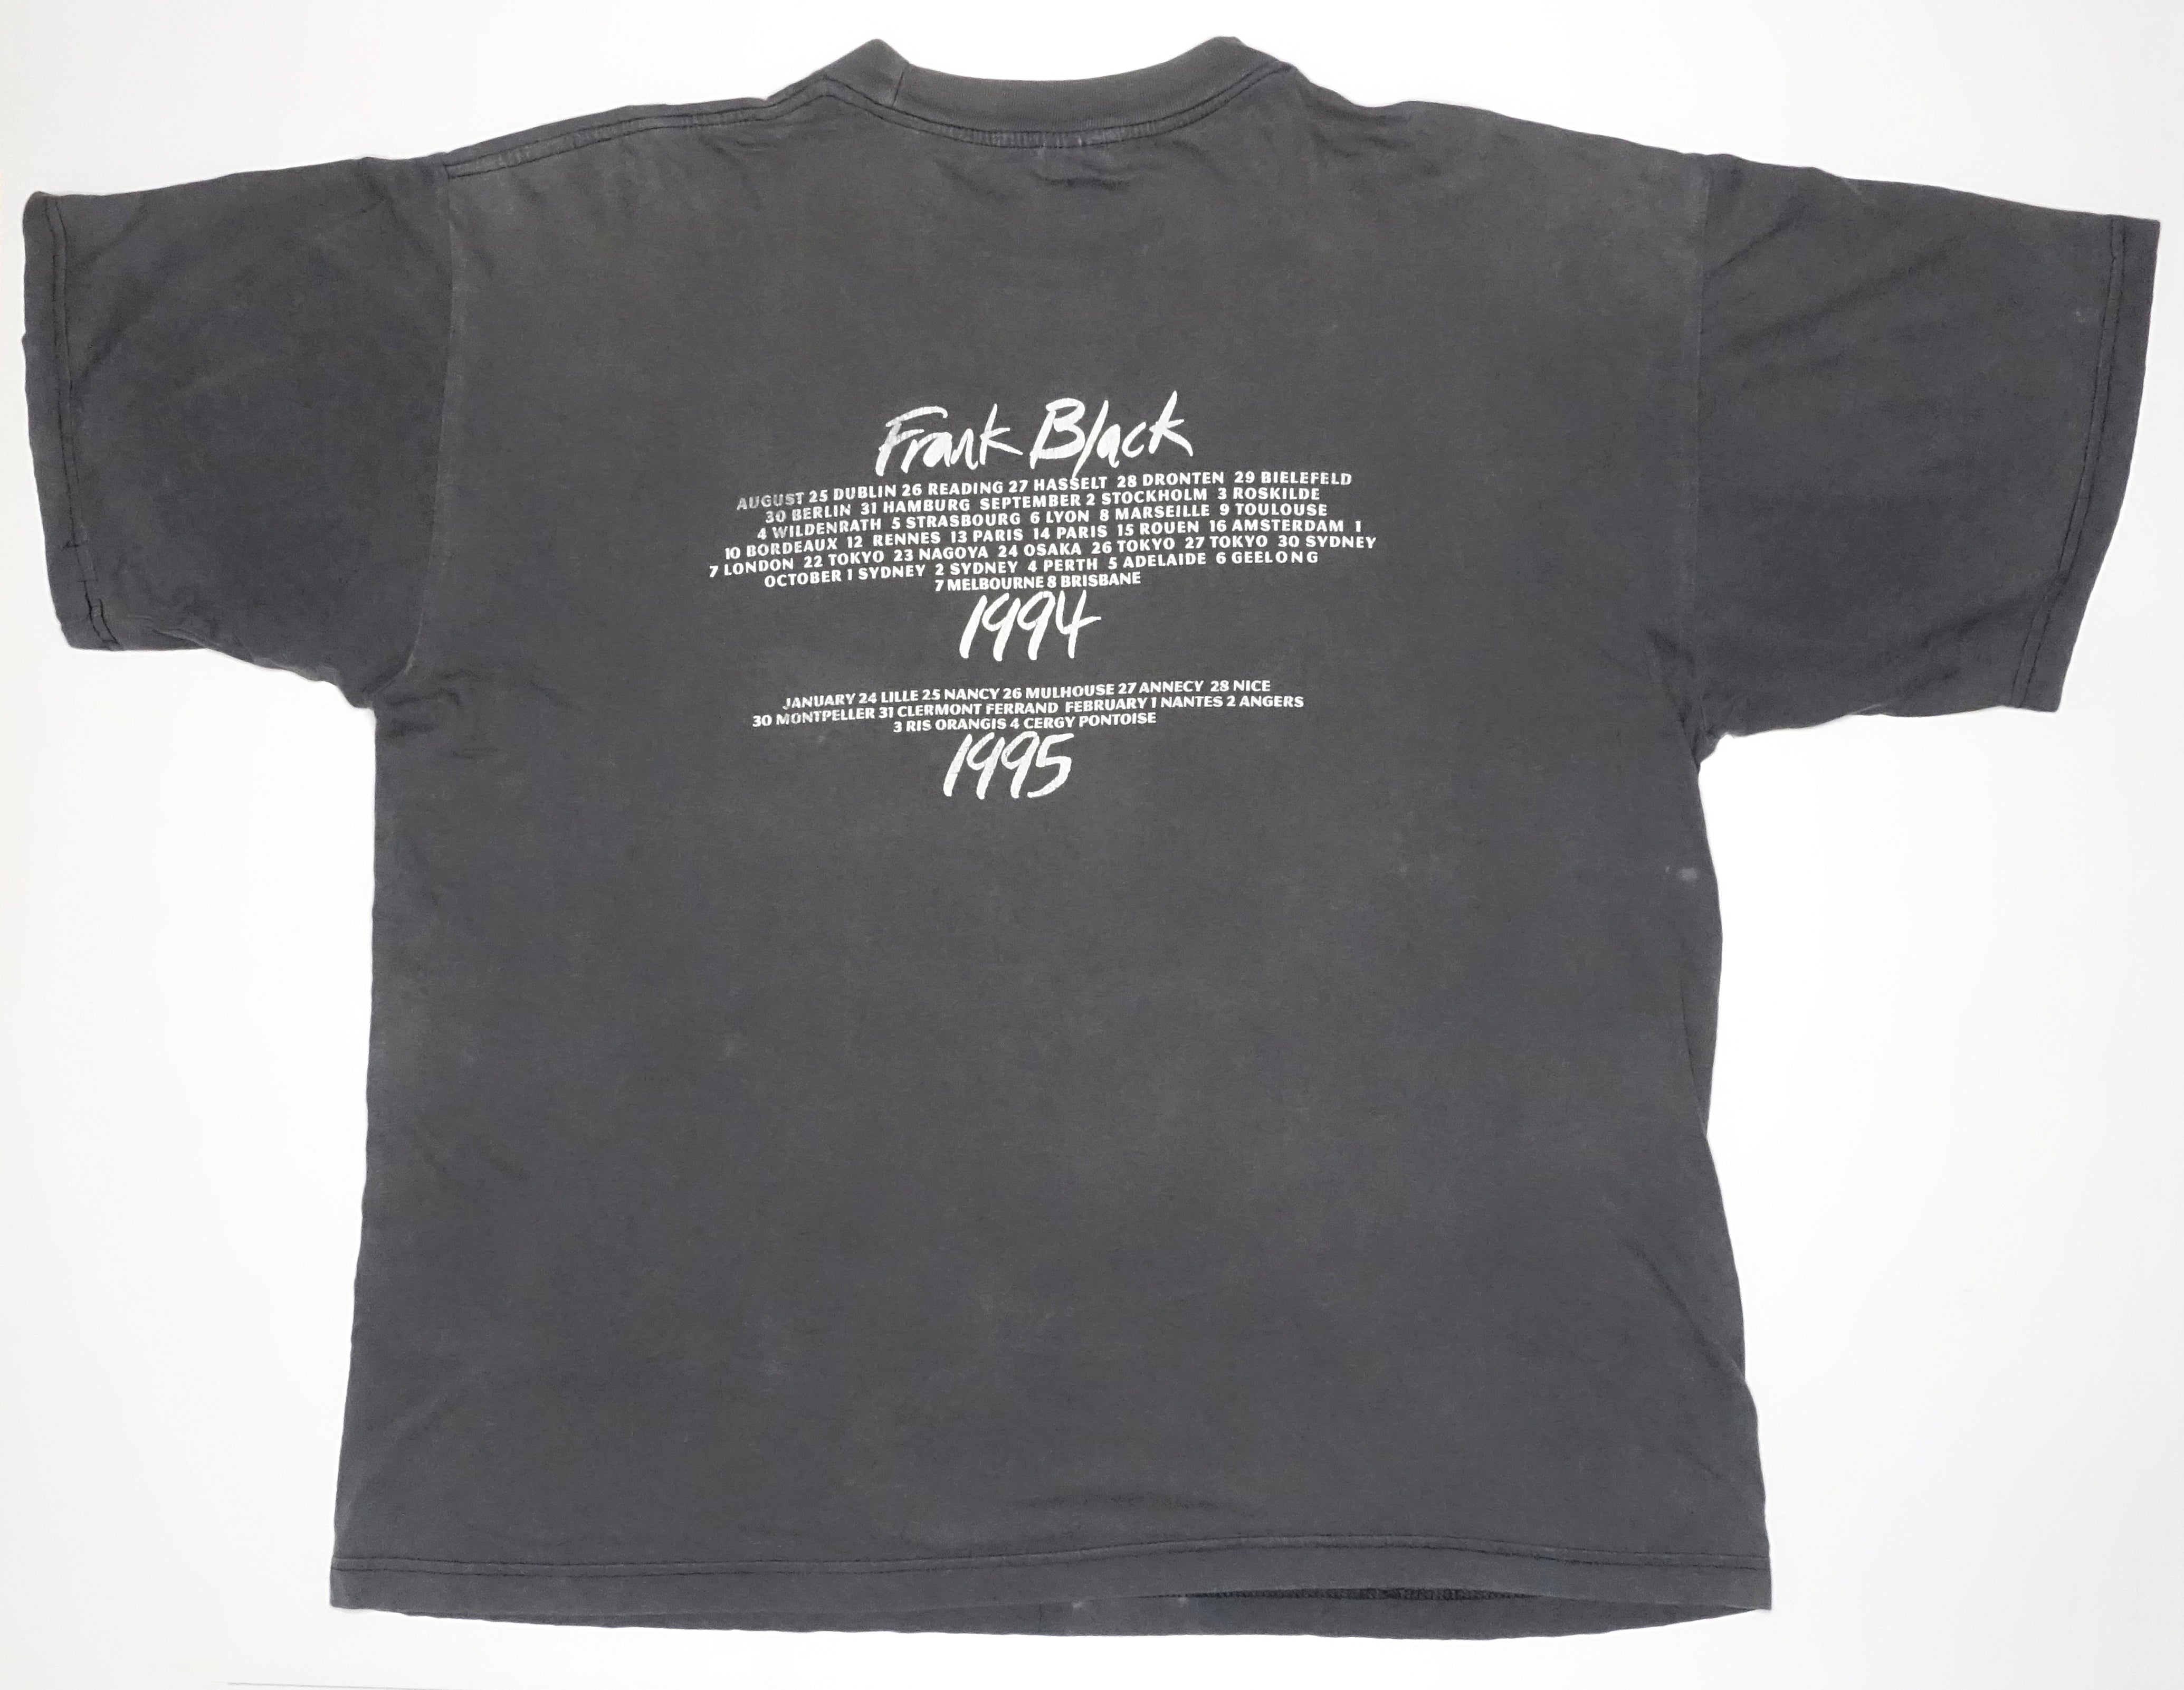 Frank Black - Teenager Of The Year 1994-95 Tour Shirt Size XXL / XL